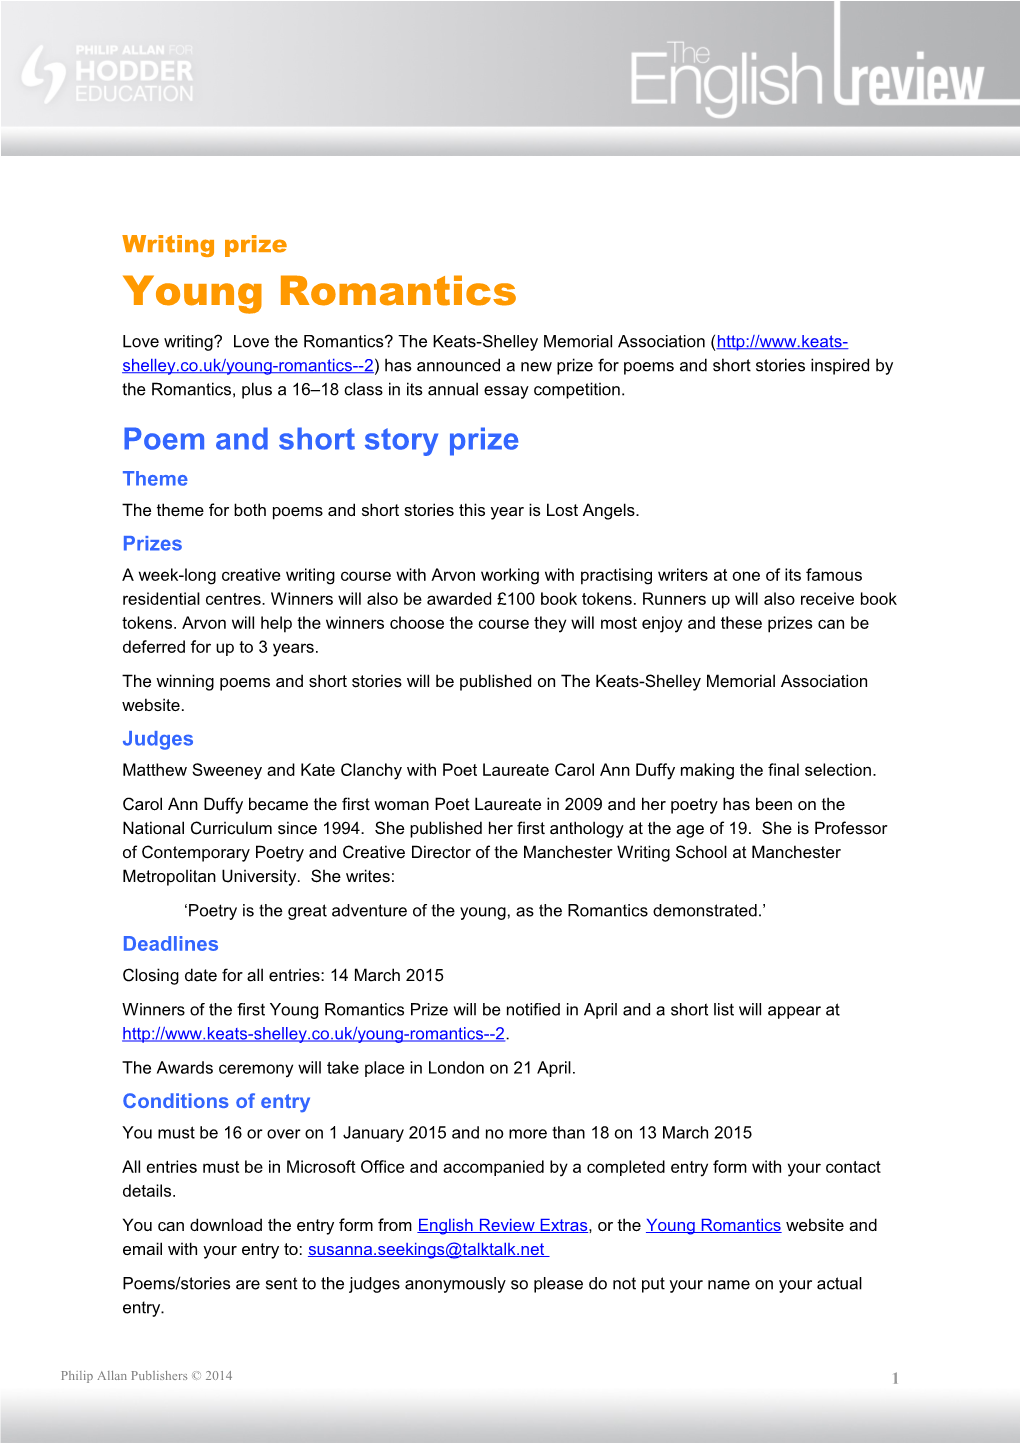 Poem and Short Story Prize